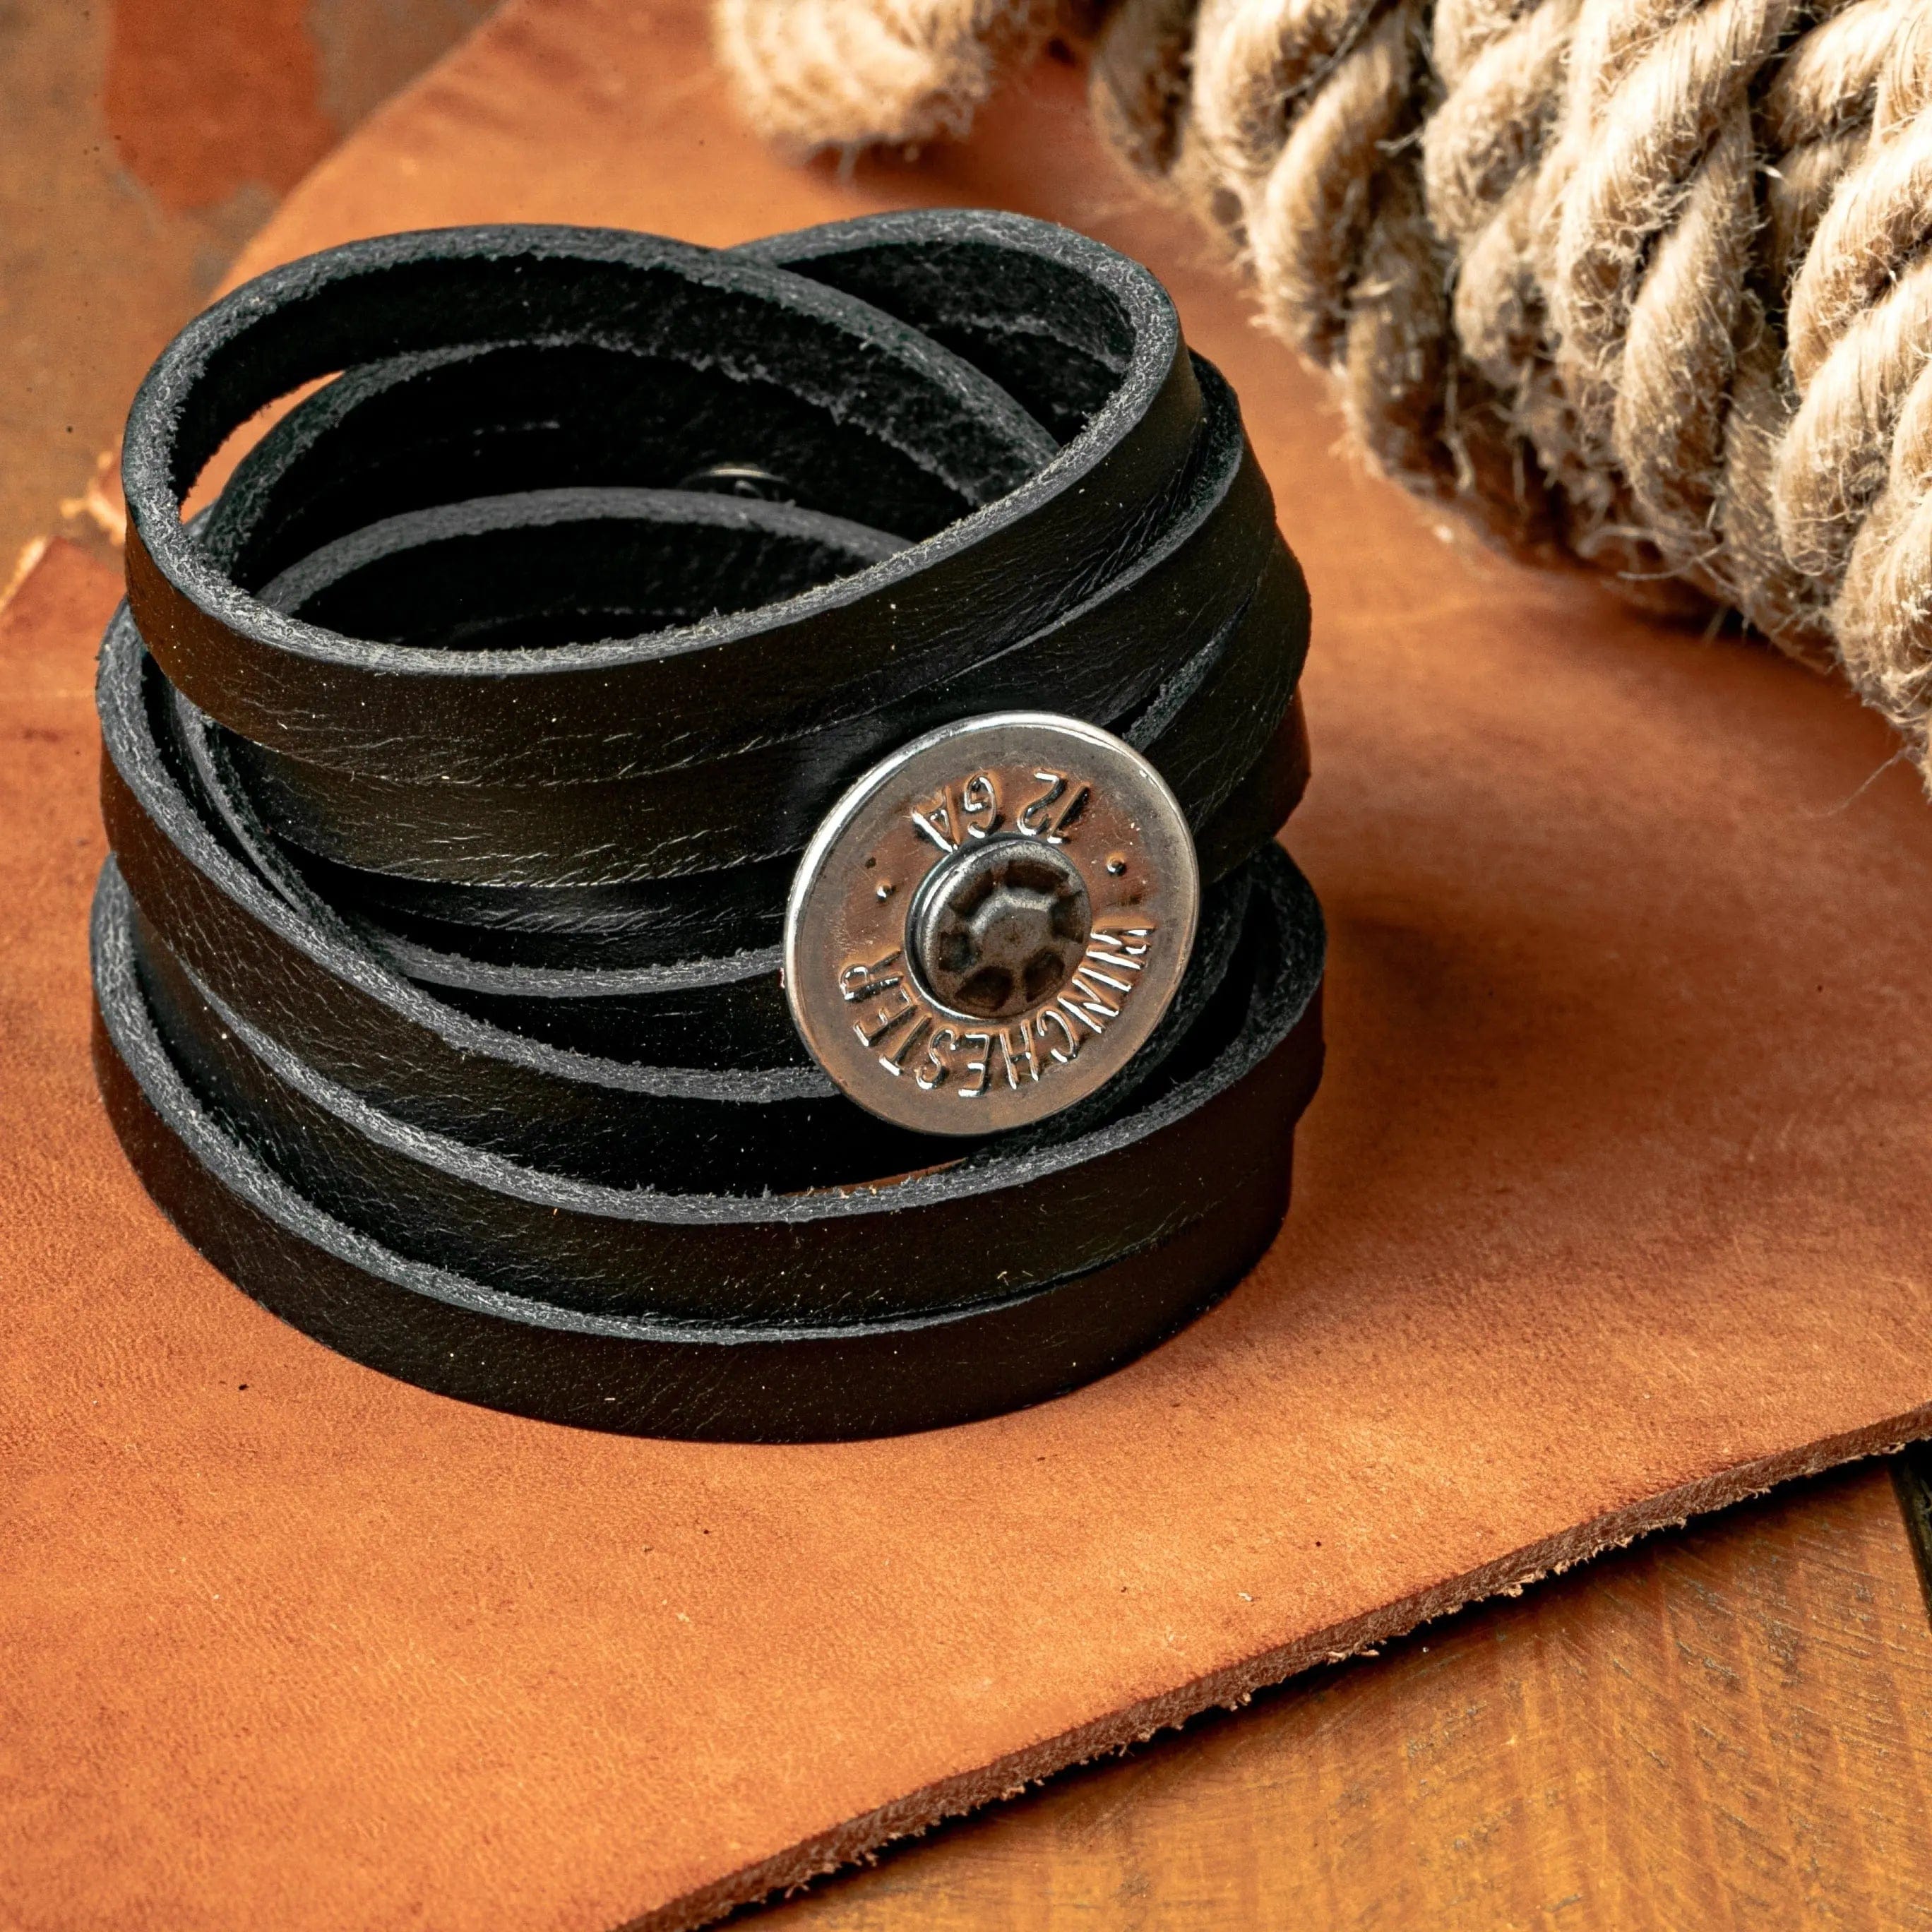 Layered Black Leather Bracelet Set - Mens Womens - 1 Inch Wide - Stainless  Steel Magnetic Clasp – Loralyn Designs